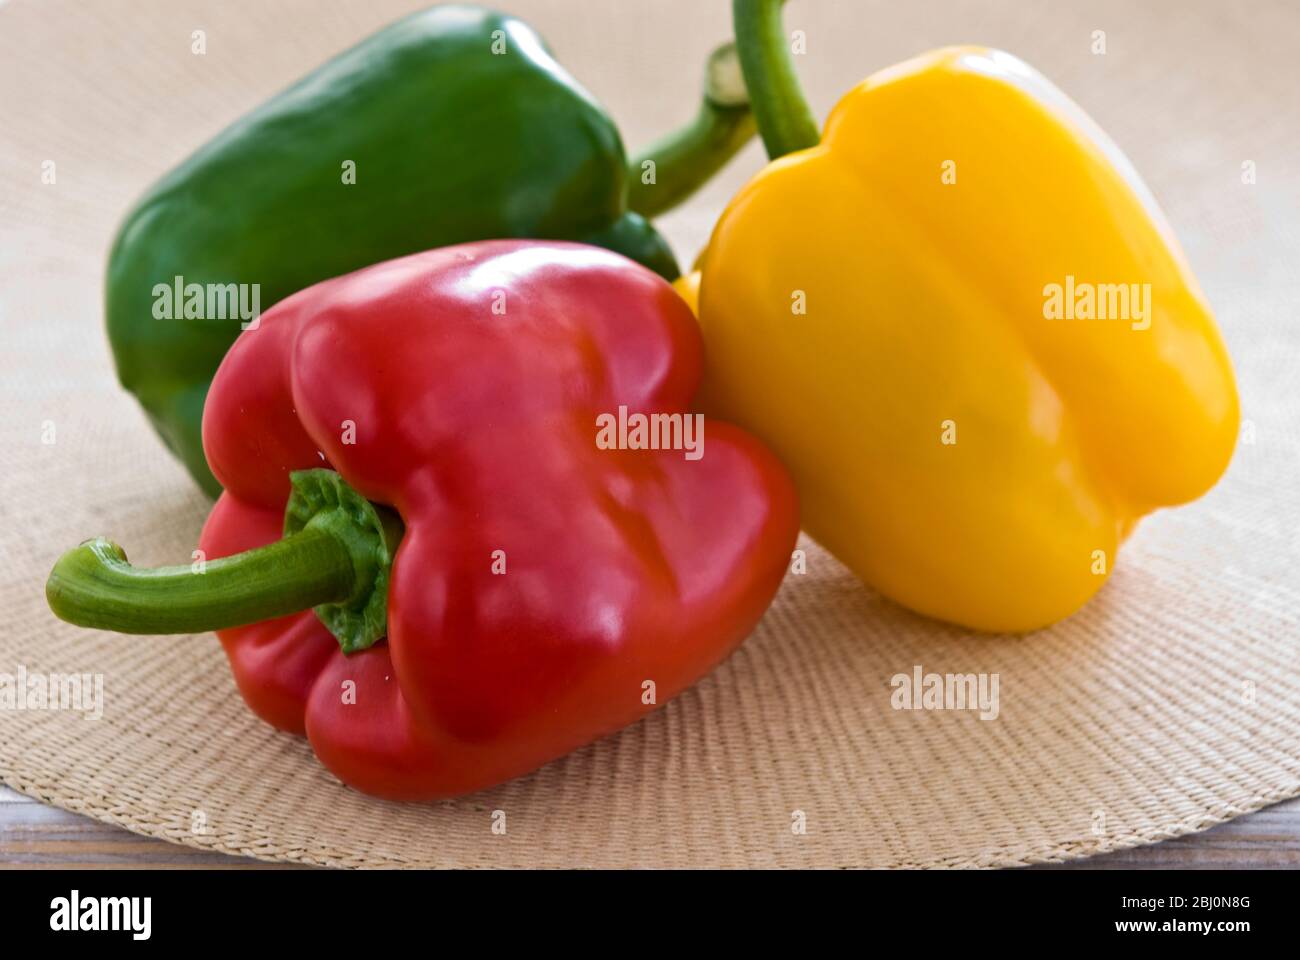 Three shiny sweet peppers, red, green, and yellow - Stock Photo